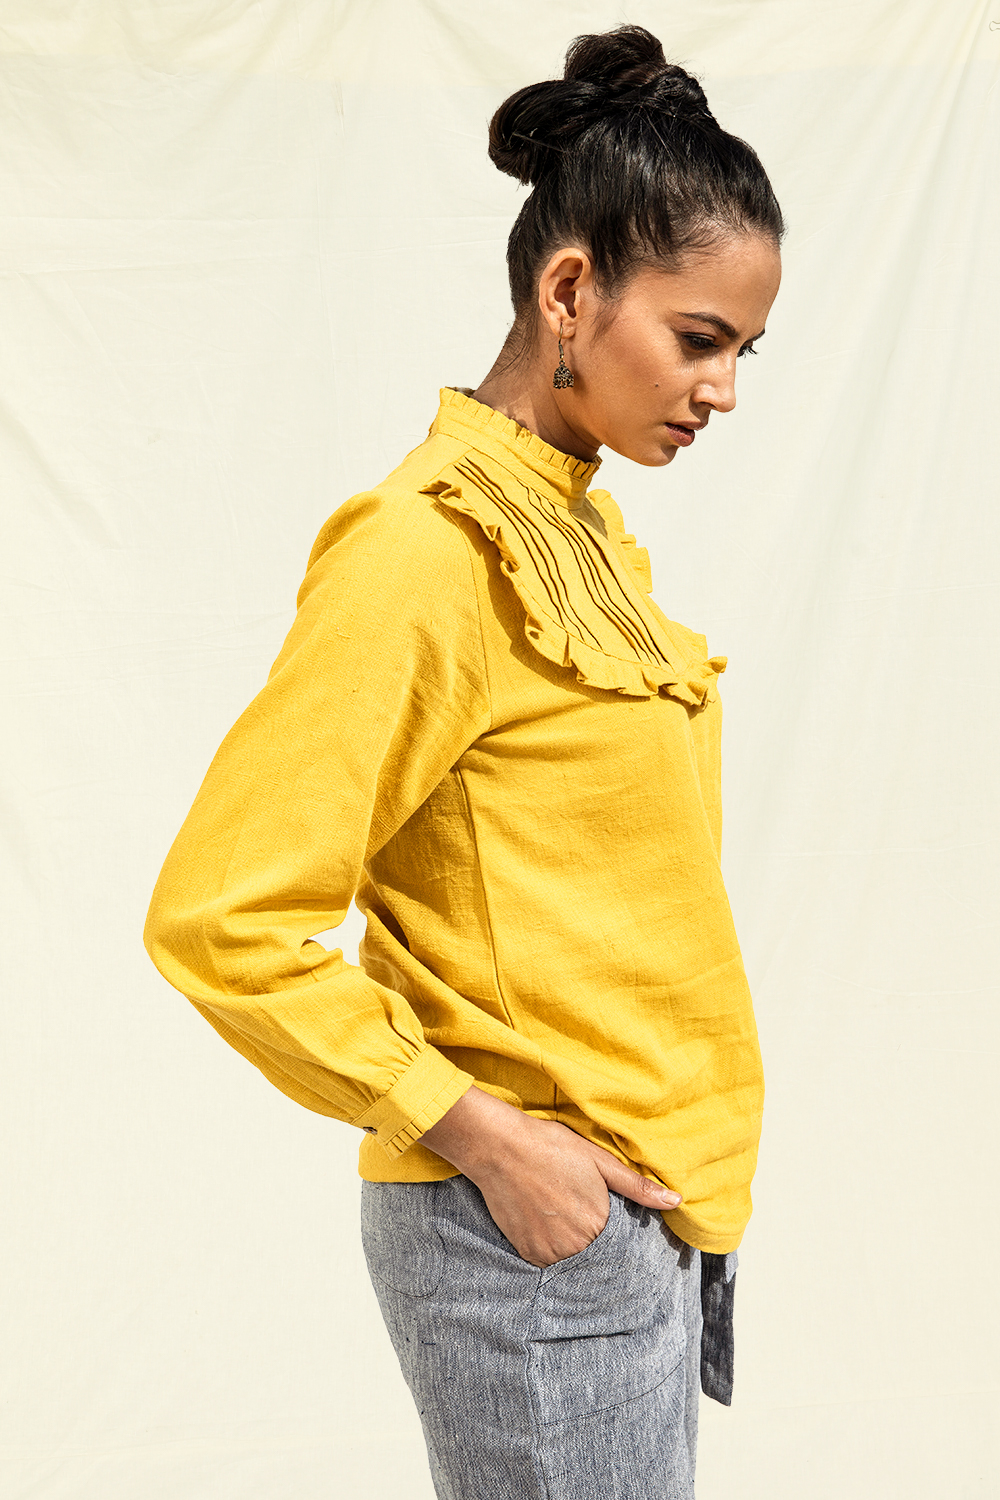 Women's pure cotton top with sleeves. Handwoven Kala Cotton Intricate Neck Detail Blouse in Yellow. Vegan clothing online